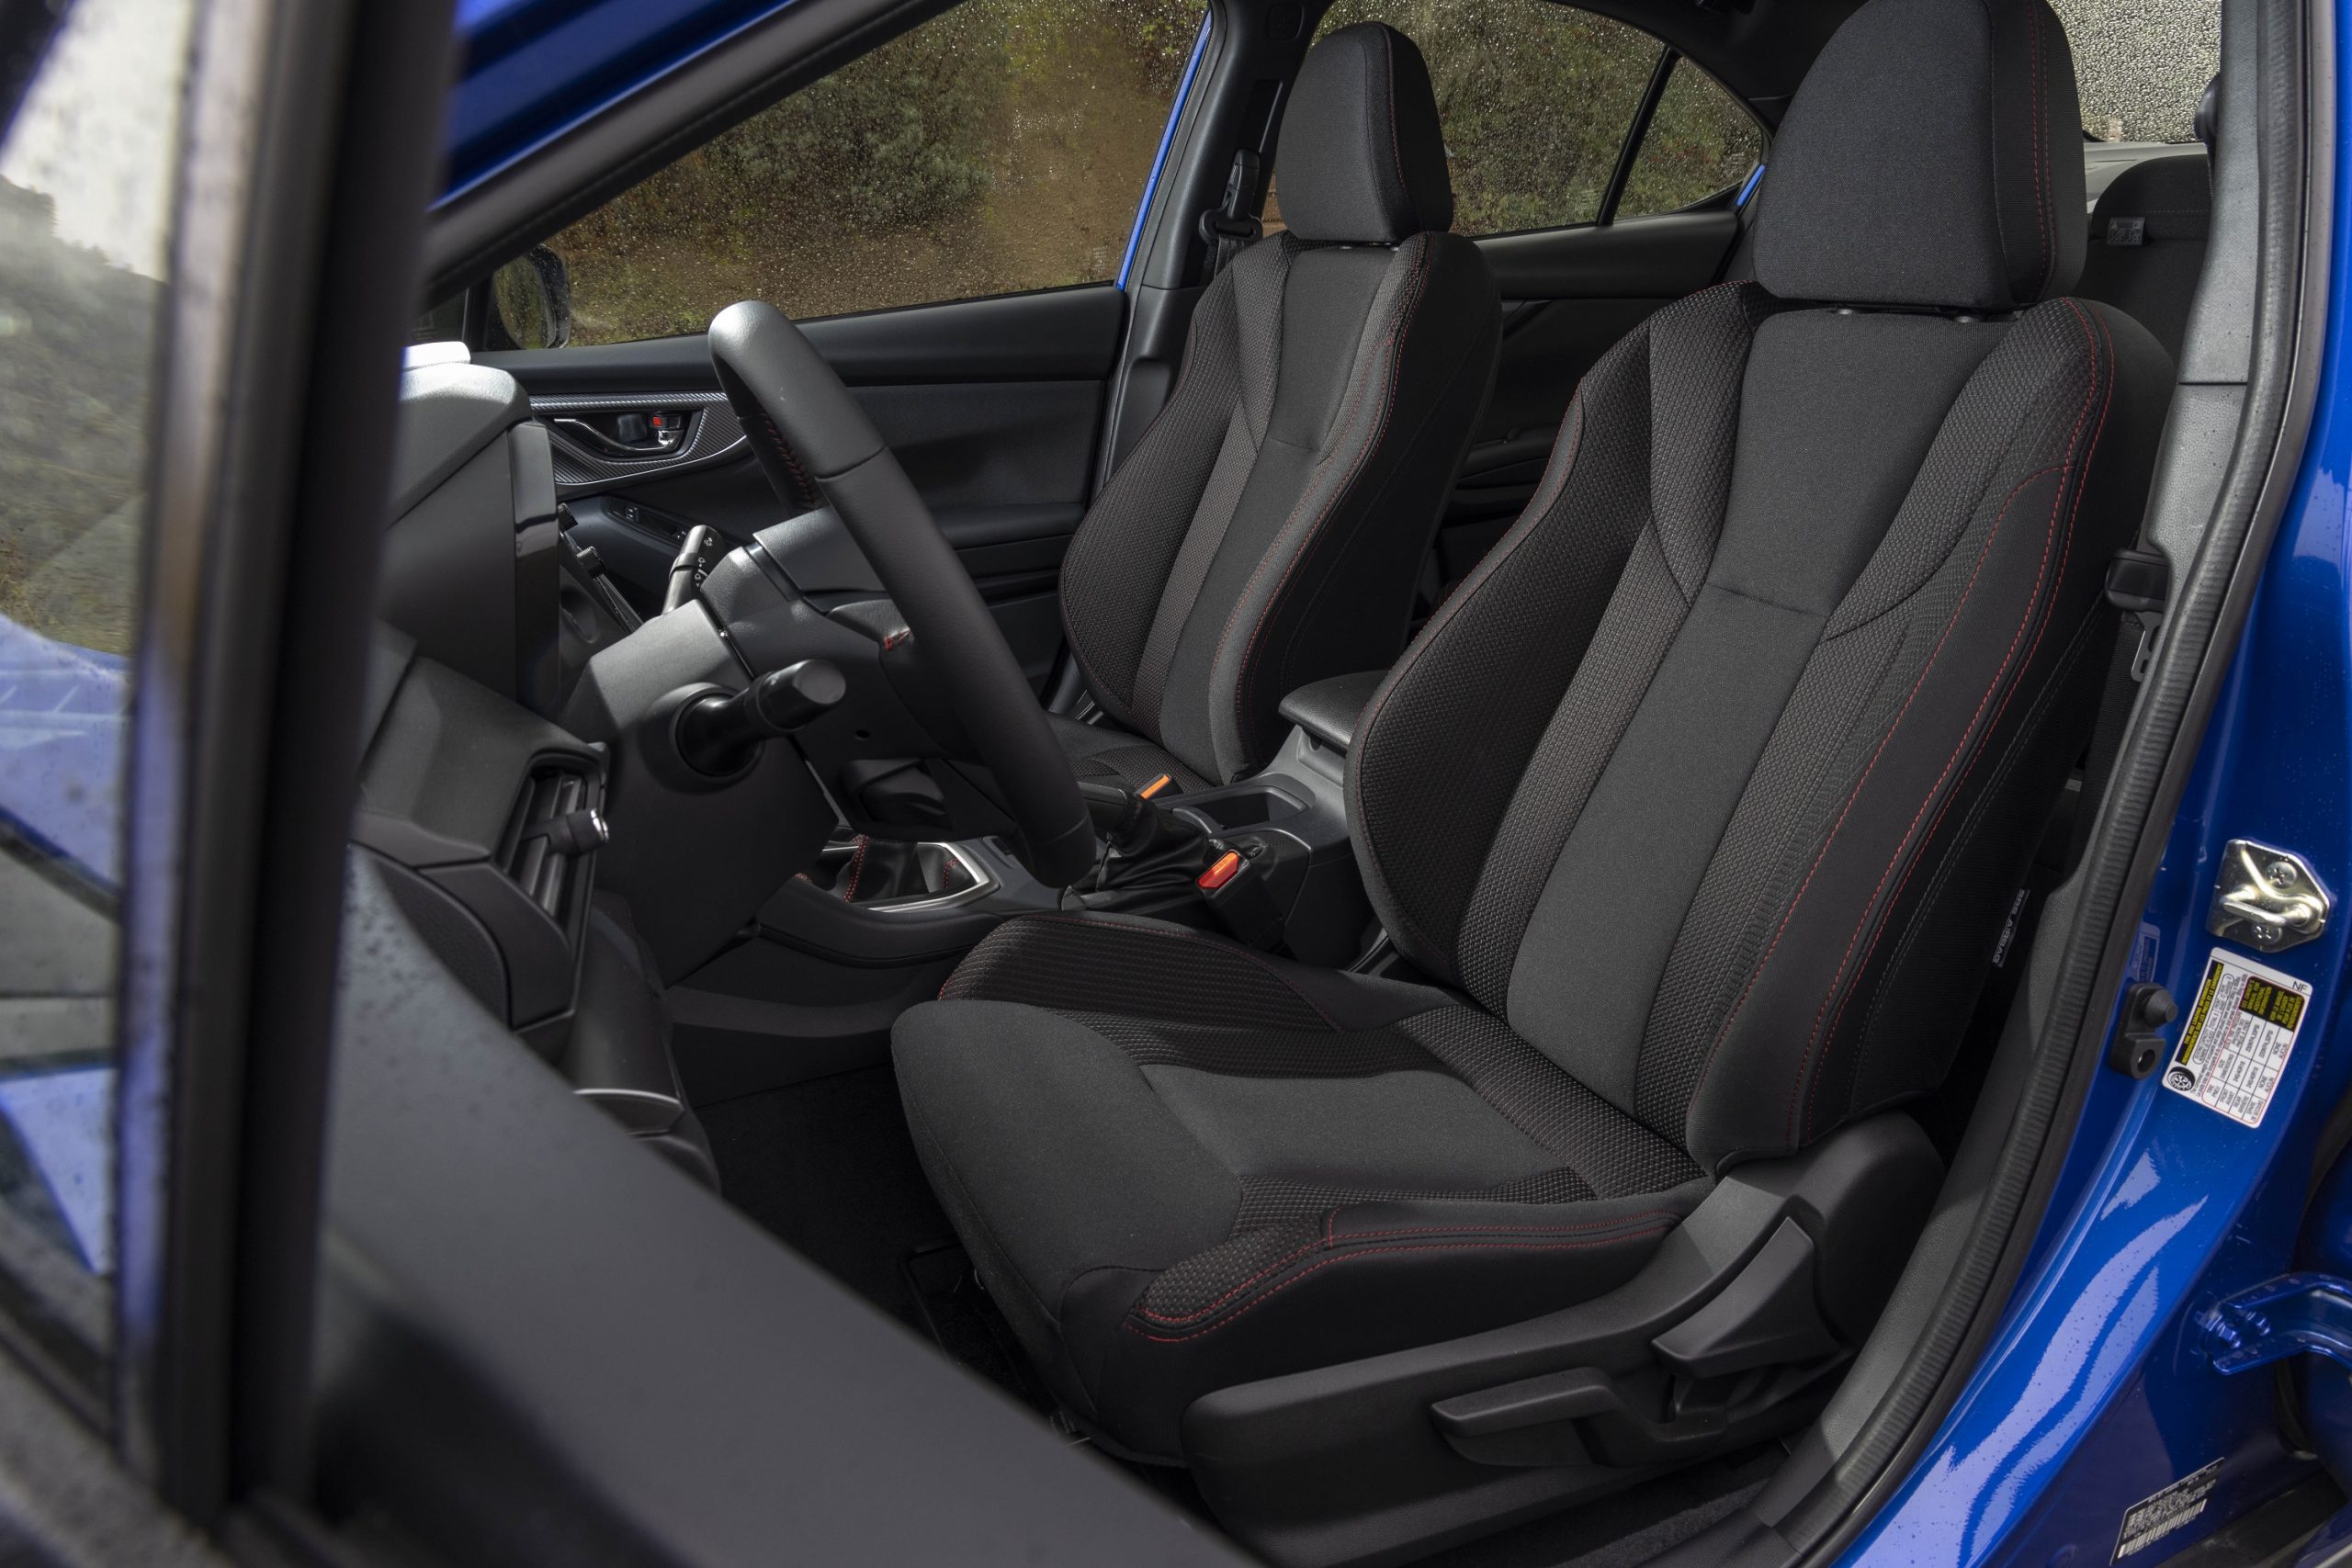 The black cloth interior of the new Subaru WRX with red stitching accents